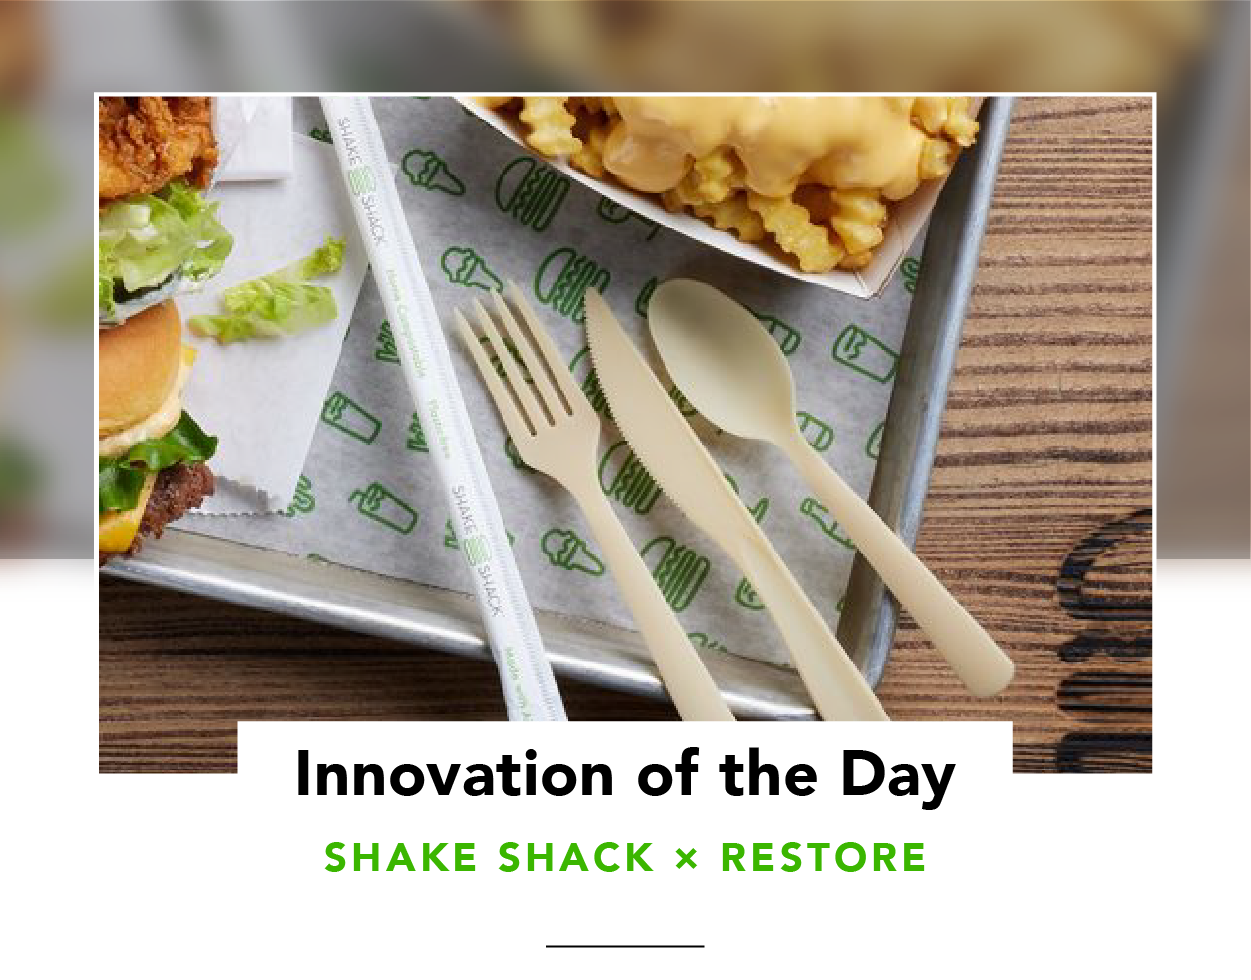 Food plus single-use cutlery and a straw, on a Shake Shack tray